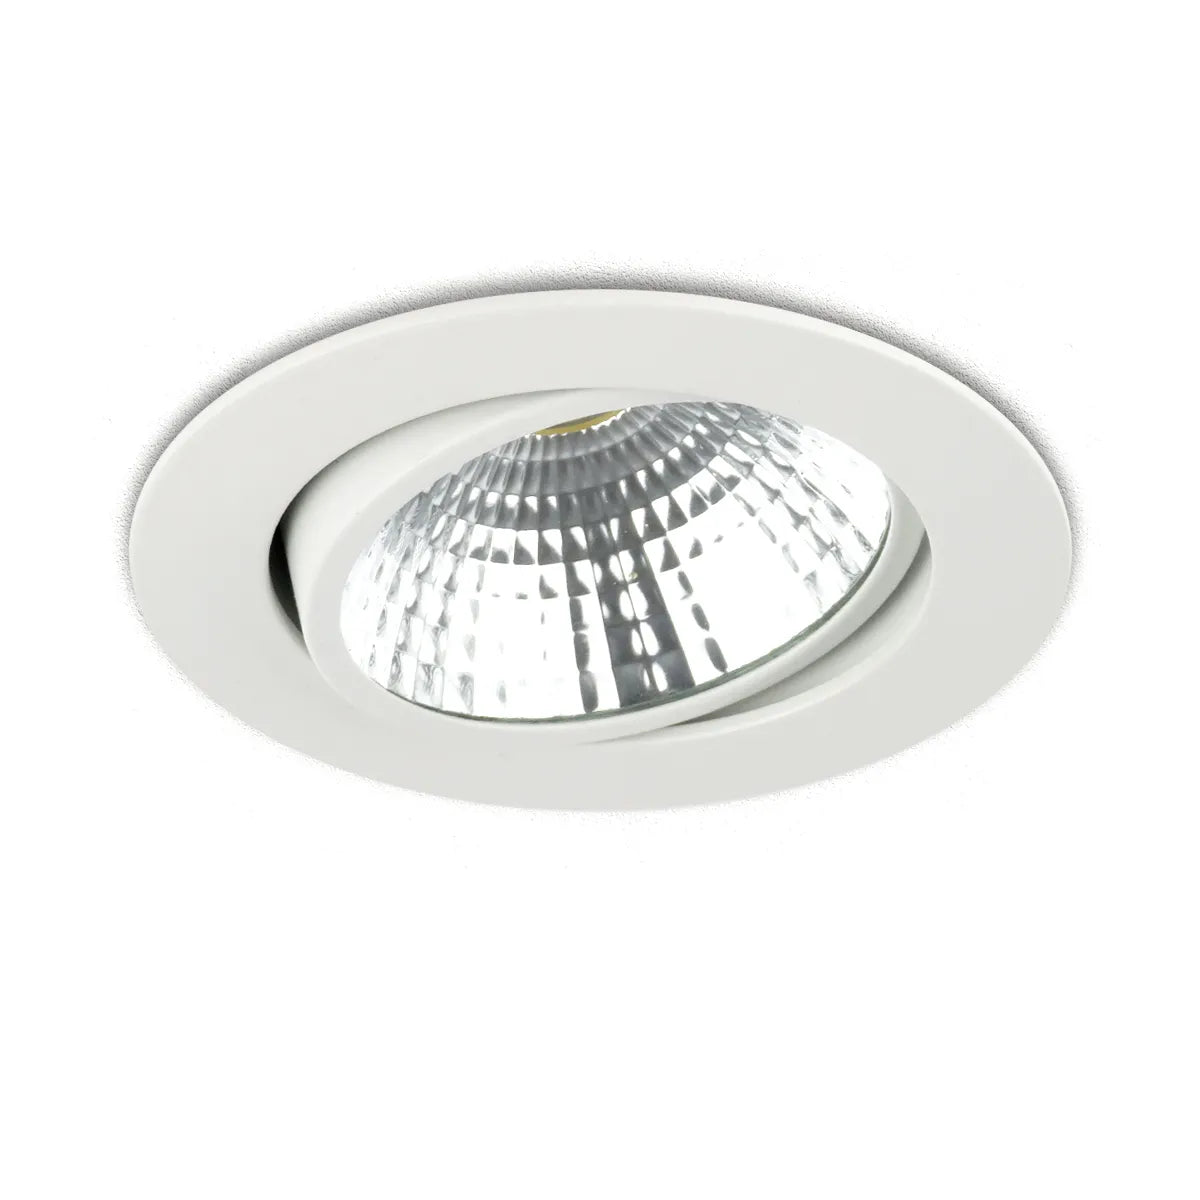 Spot encastrable LED 7W ⌀110mm dimmable, inclinable